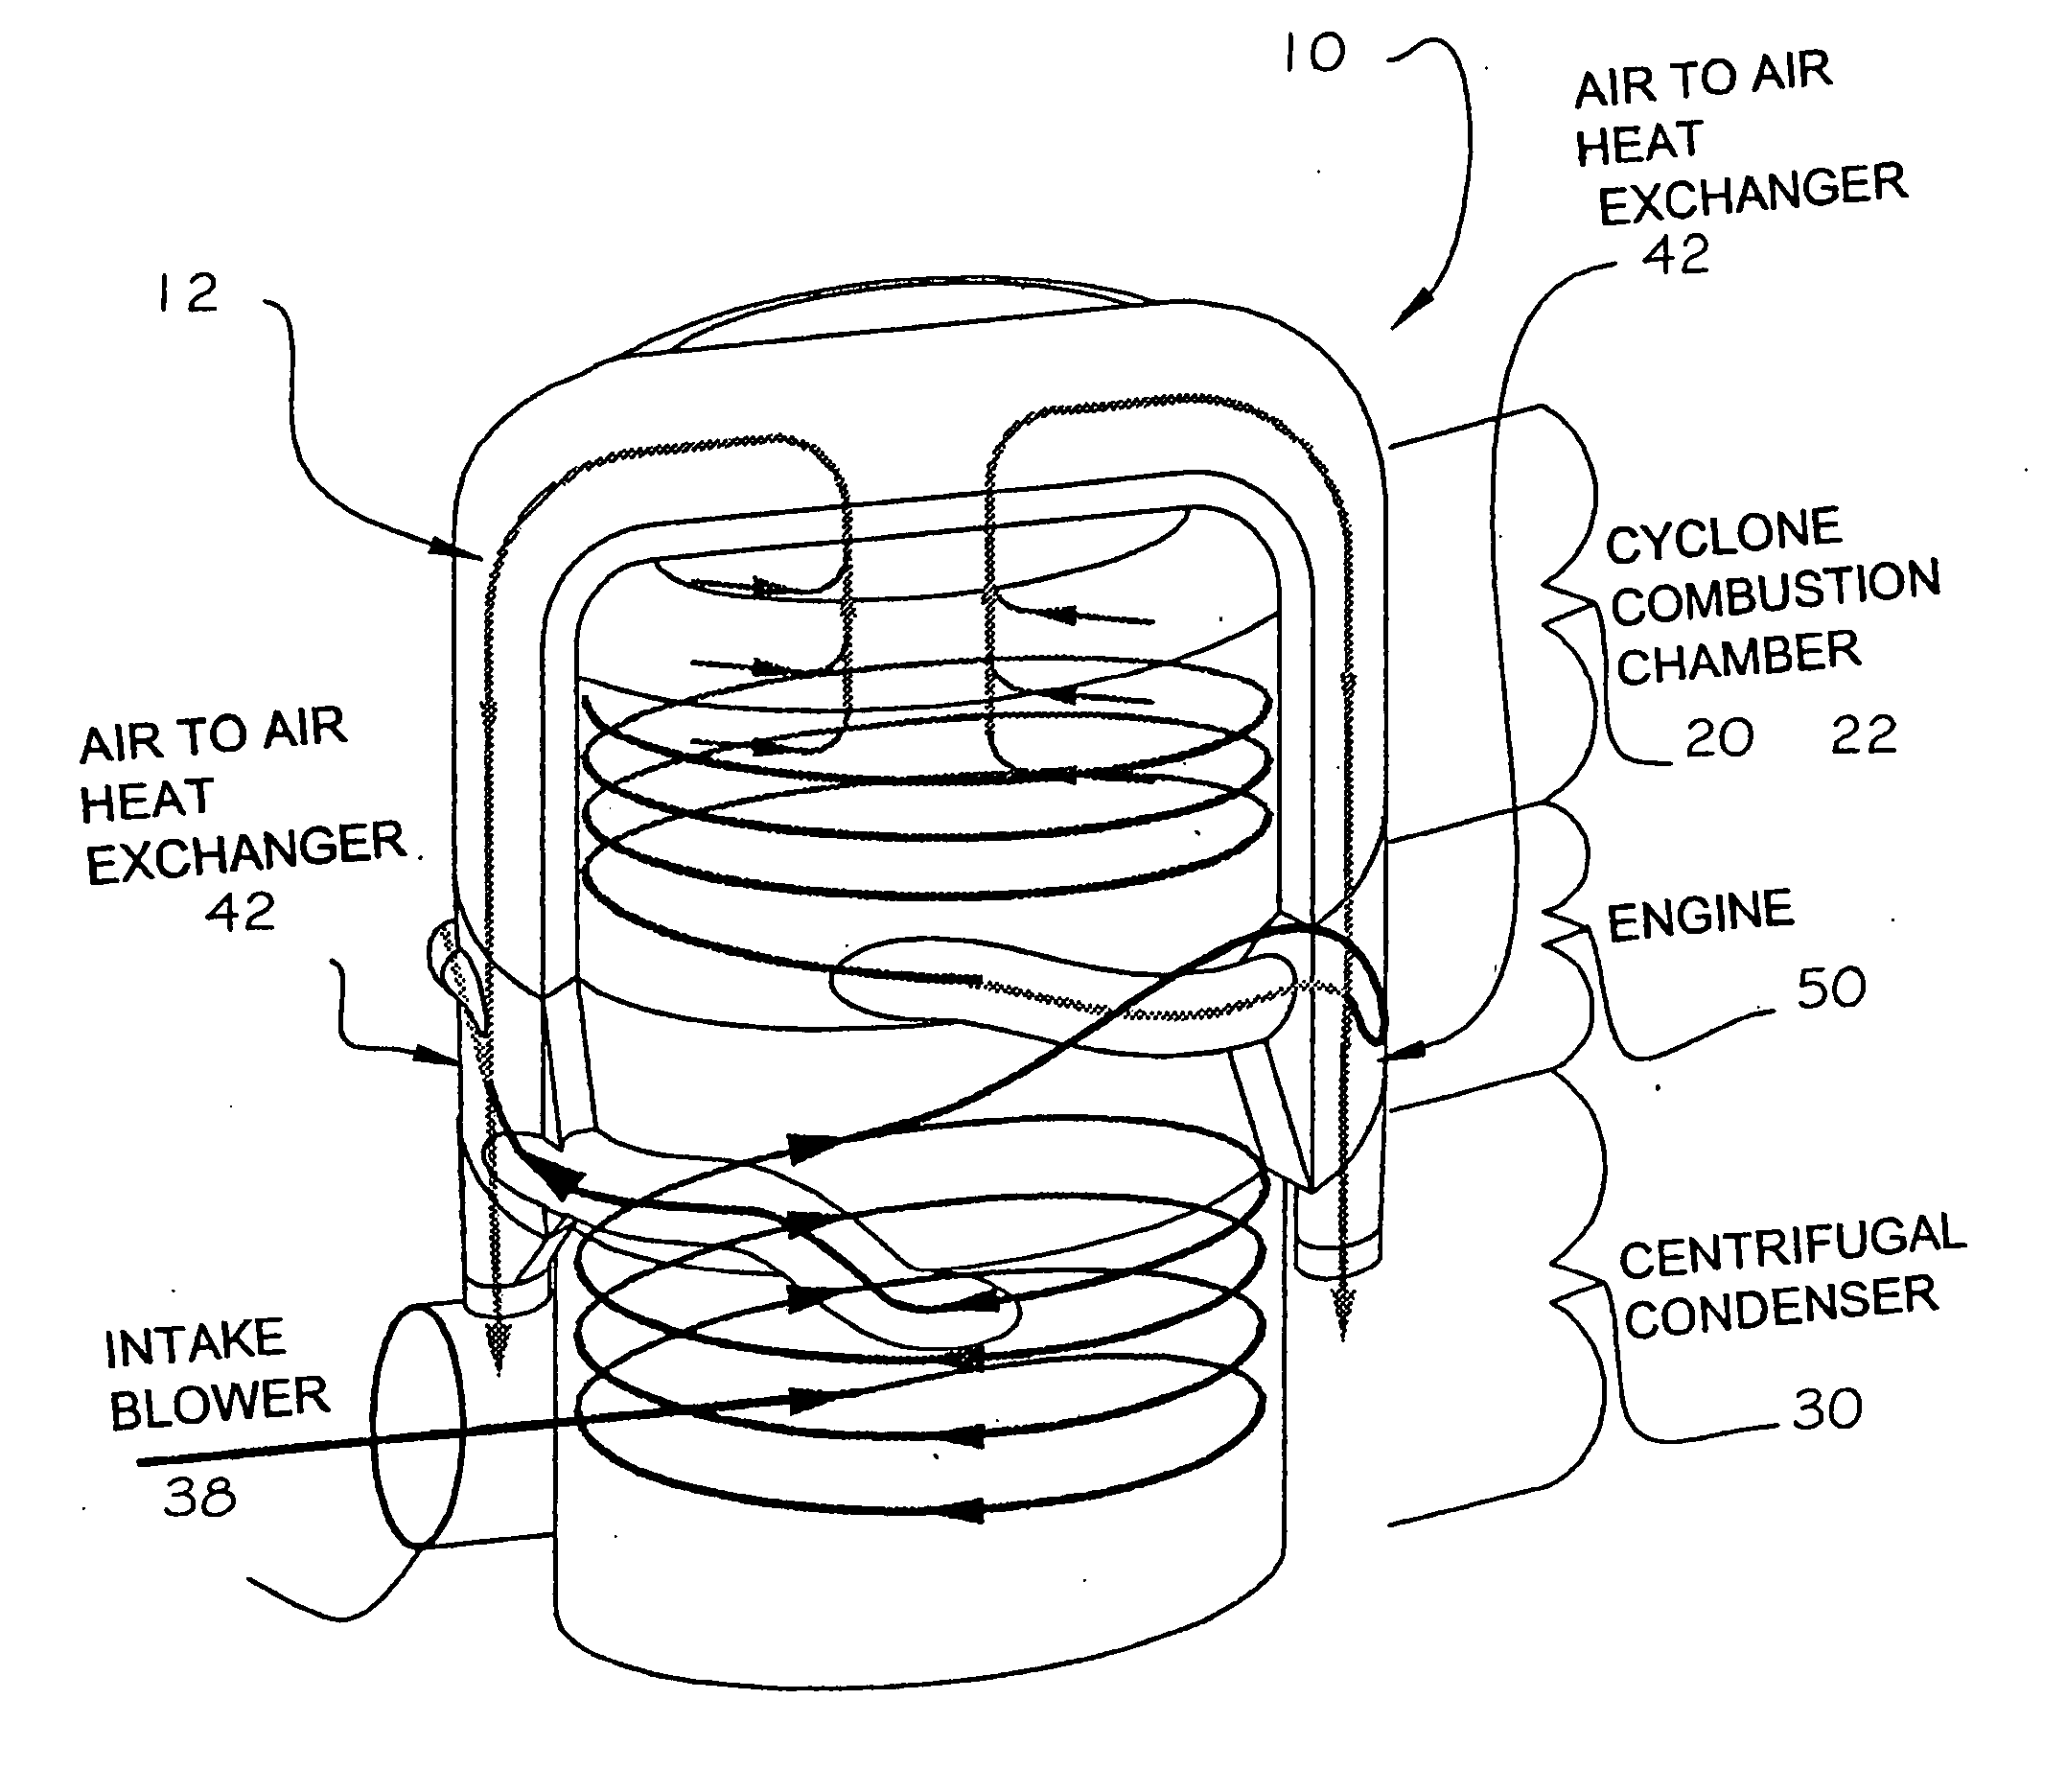 Engine reversing and timing control mechanism in a heat regenerative engine